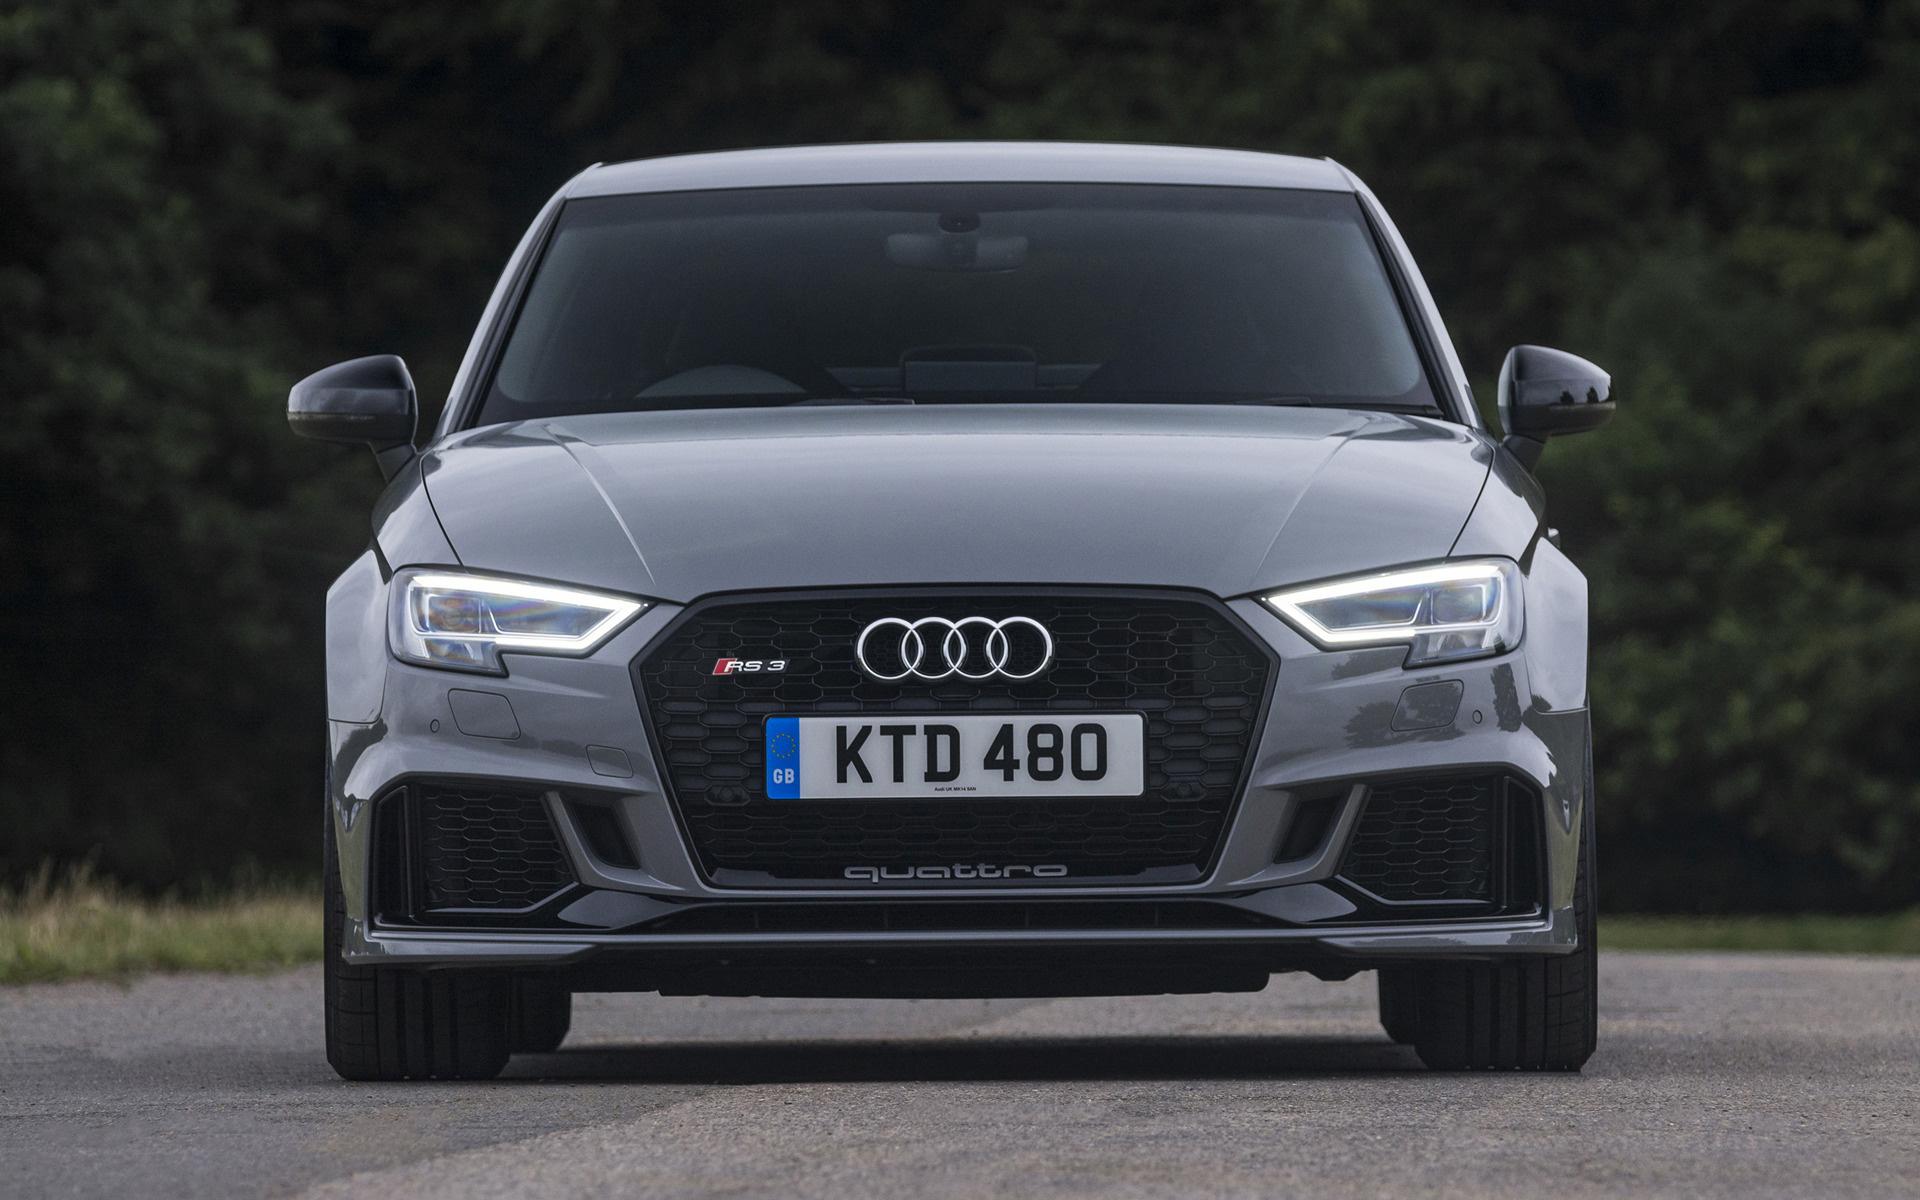 Audi RS 3 Saloon (UK) and HD Image